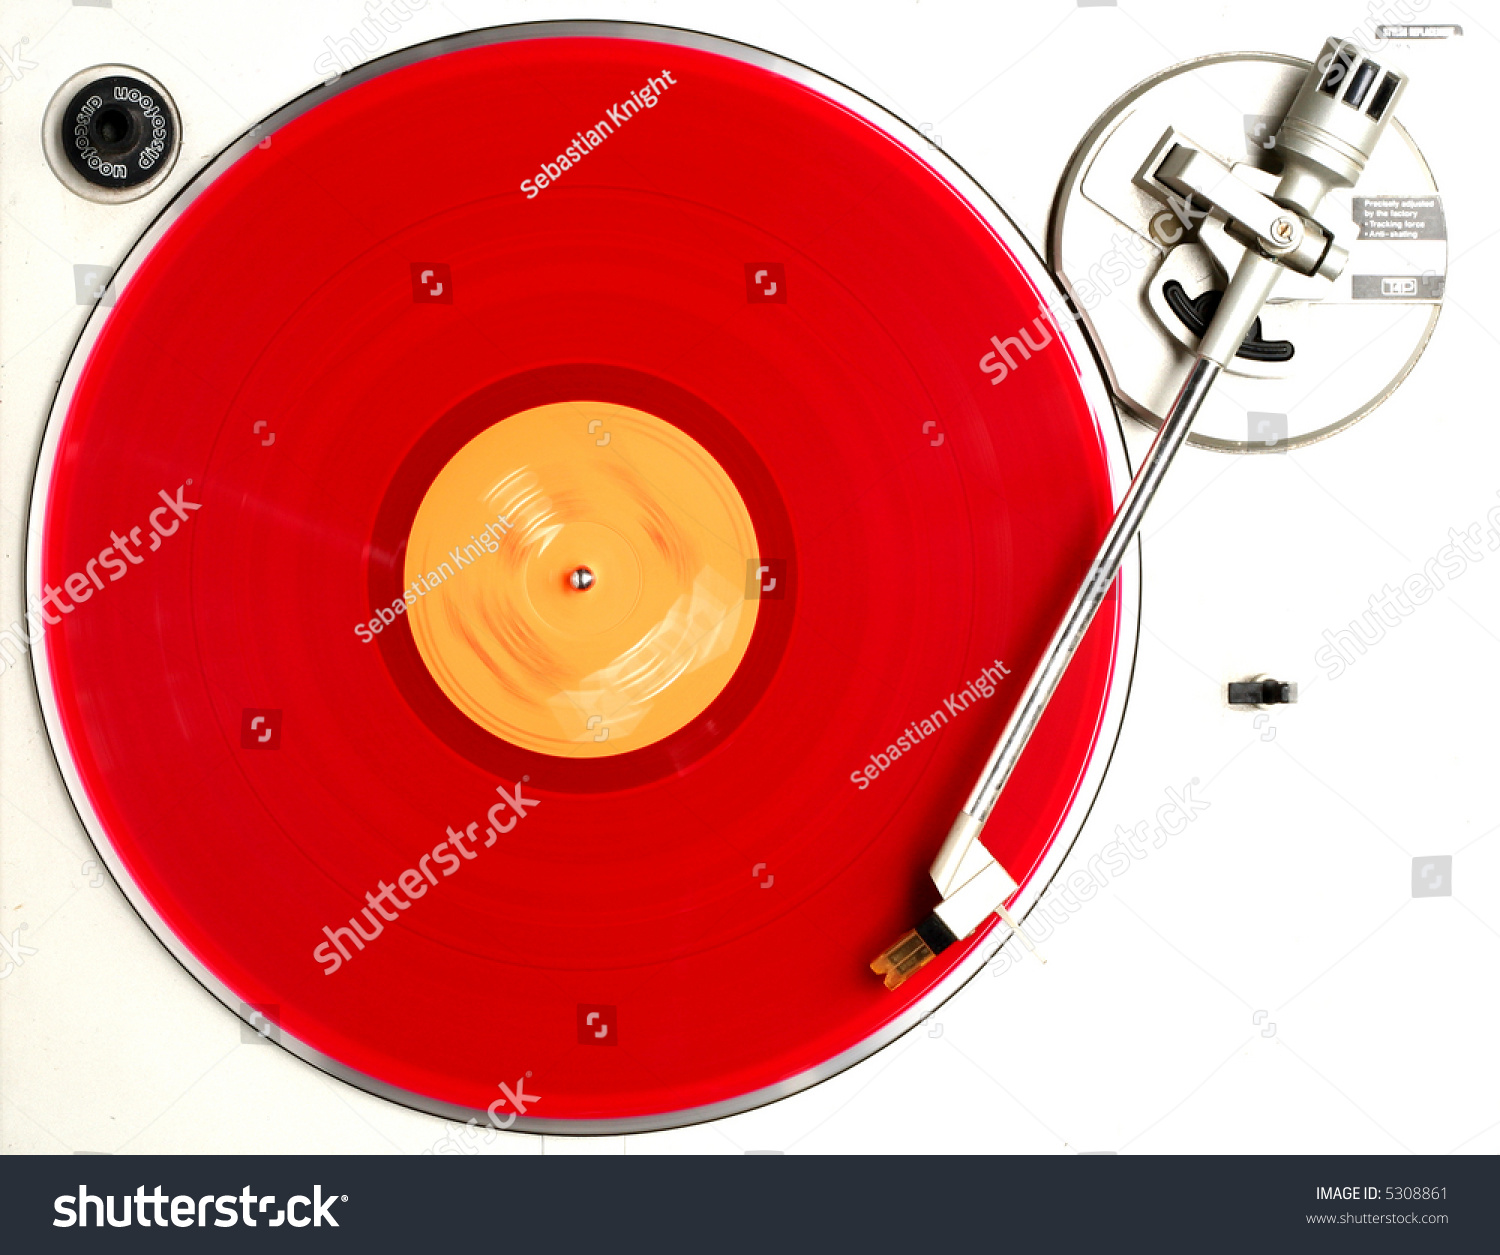 red album on turntable #5308861